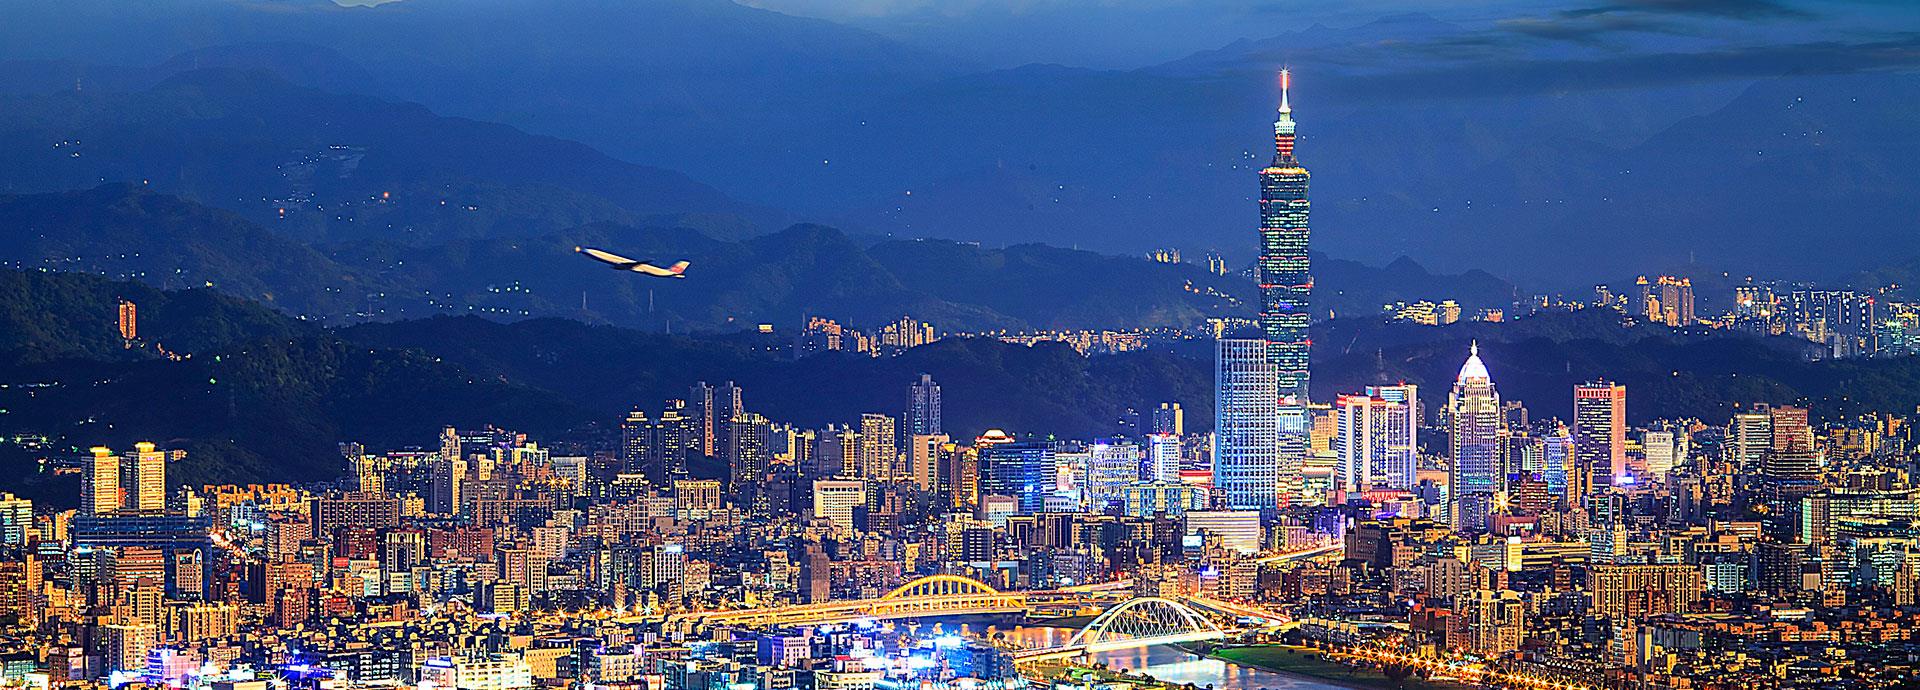 The optimal path for greater use of renewable energy in Taiwan